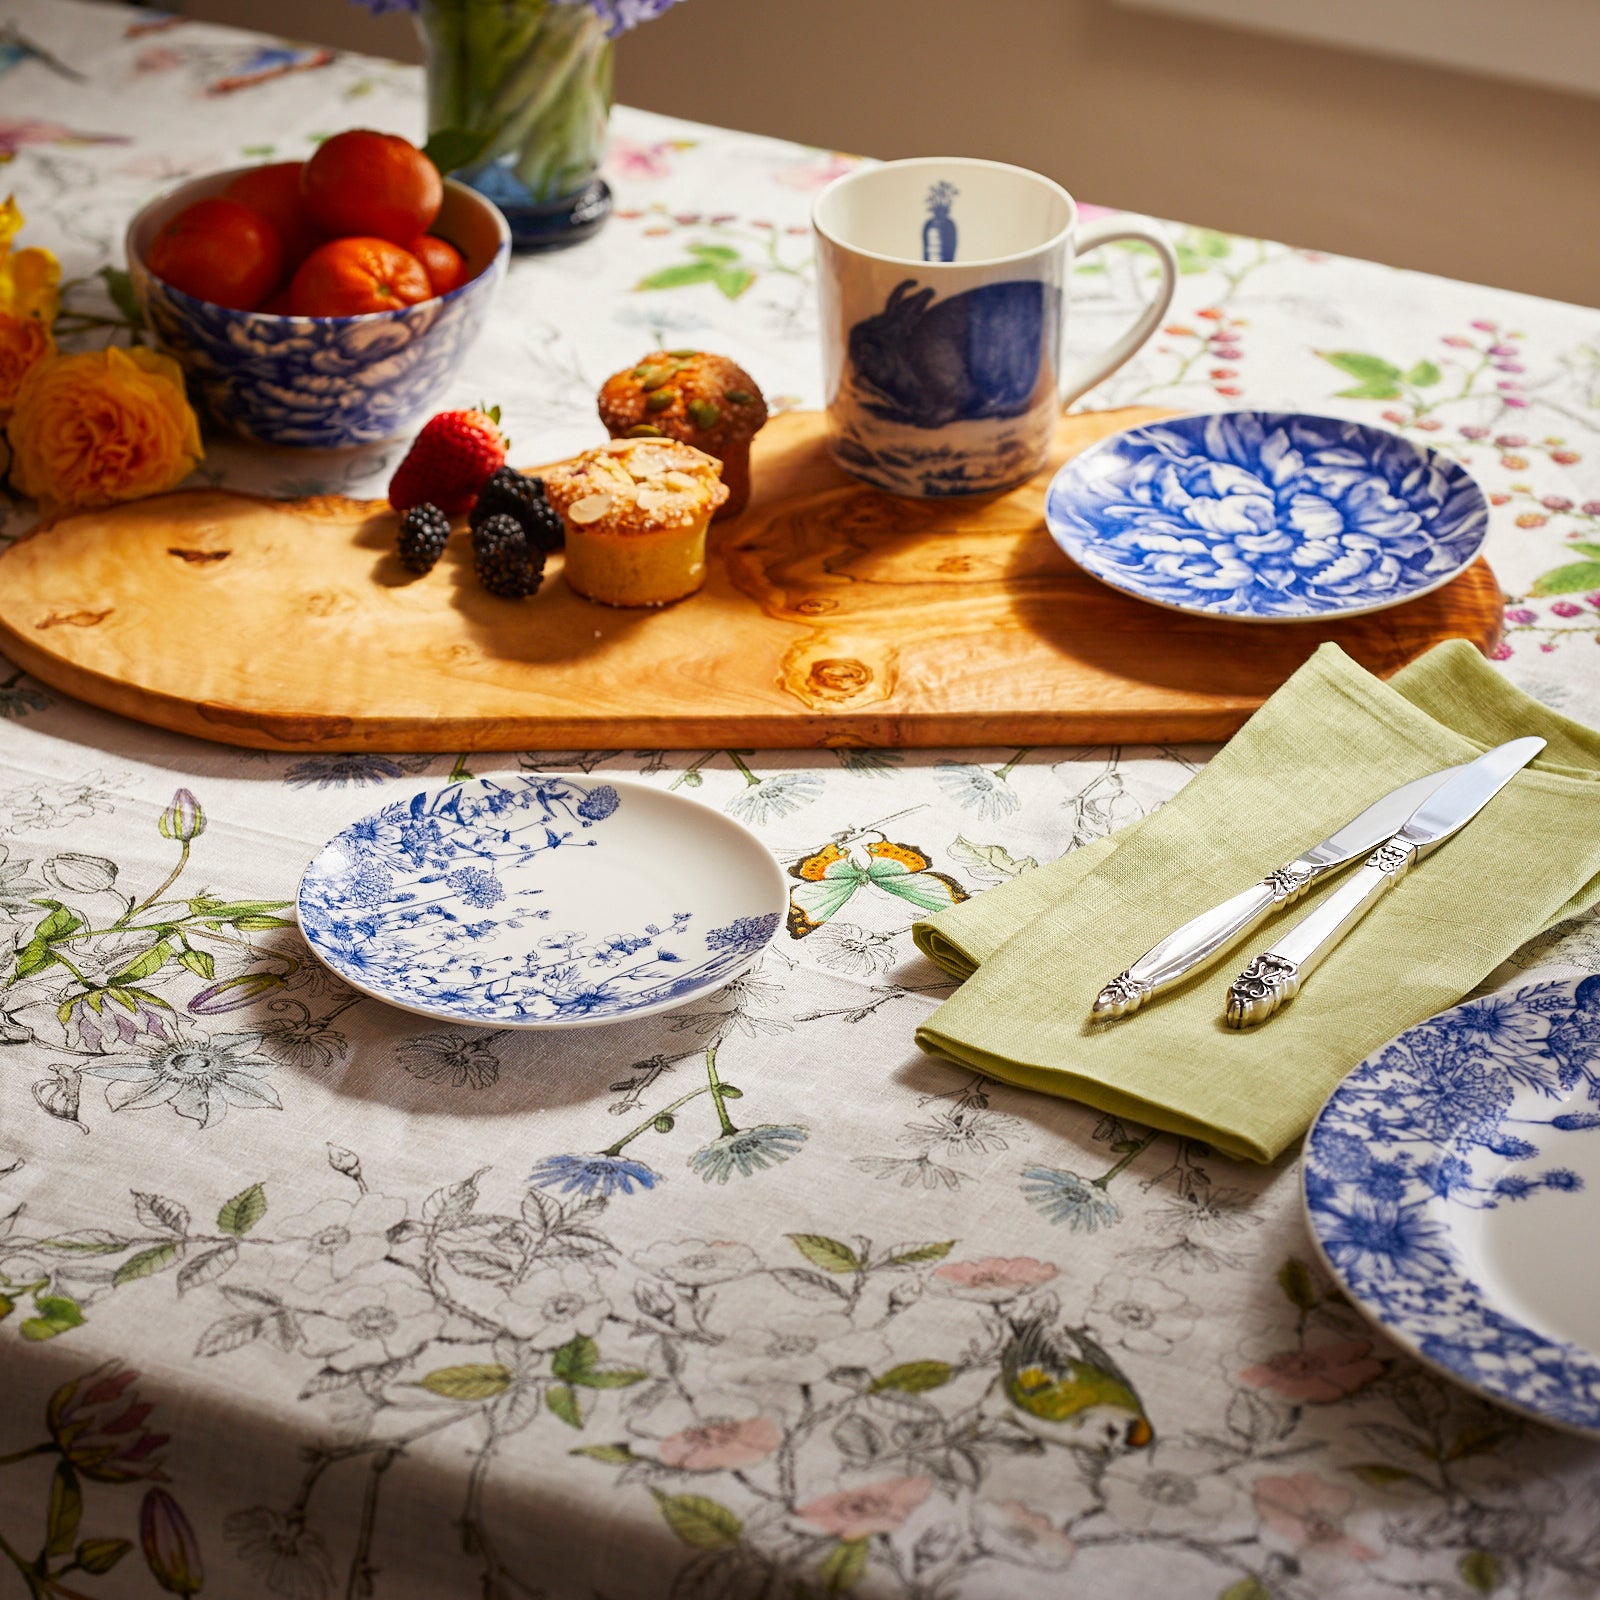 Five Summer Blues Small Plates by Caskata, crafted from high-fired porcelain with blue floral designs, are arranged in a semi-circular pattern.